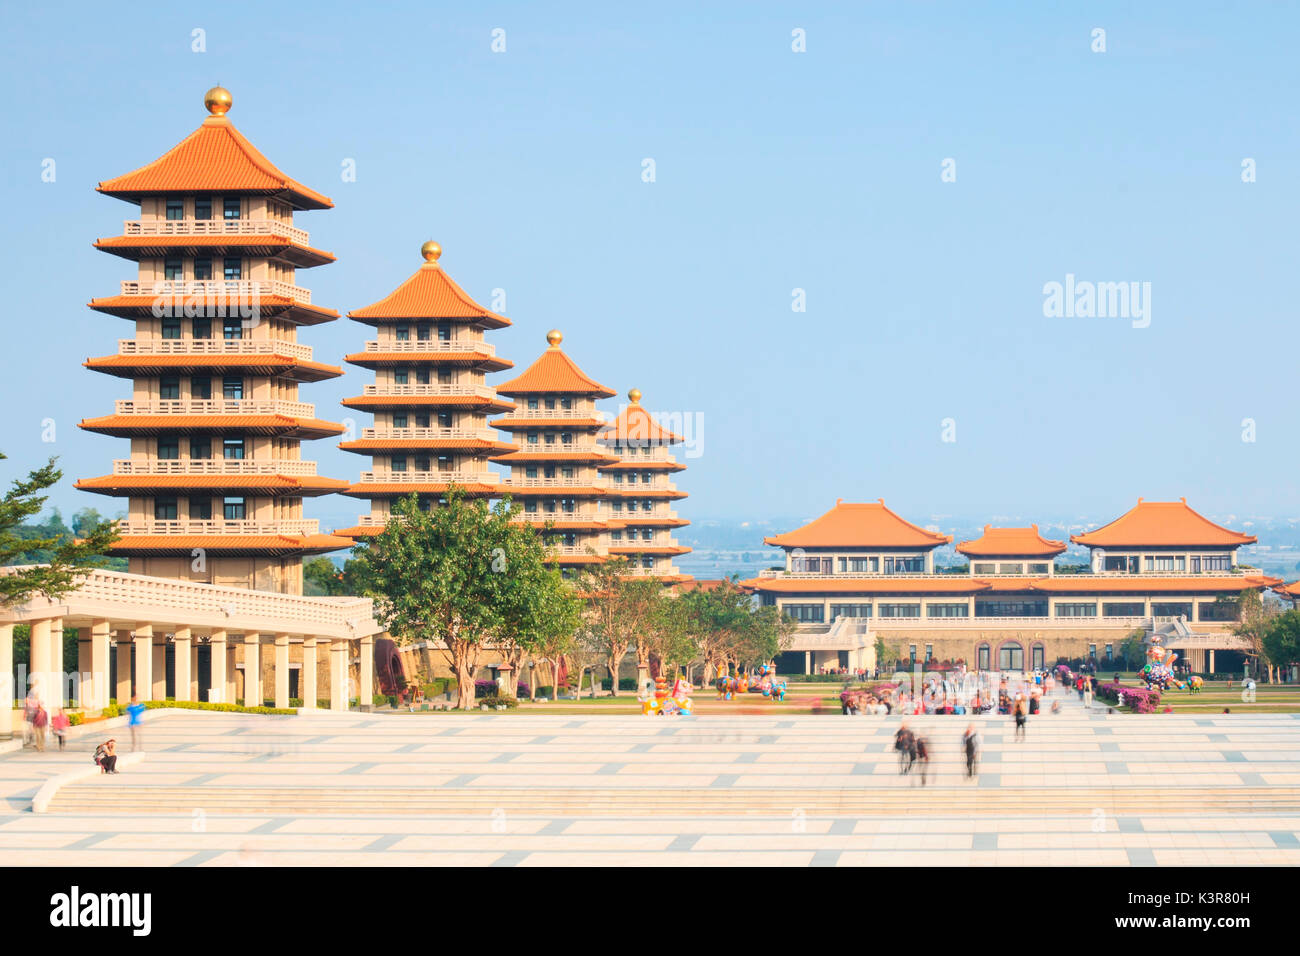 Kaohsiung, Taiwan. Fo Guang Shan buddist temple of Kaohsiung with many tourists walking by. Stock Photo